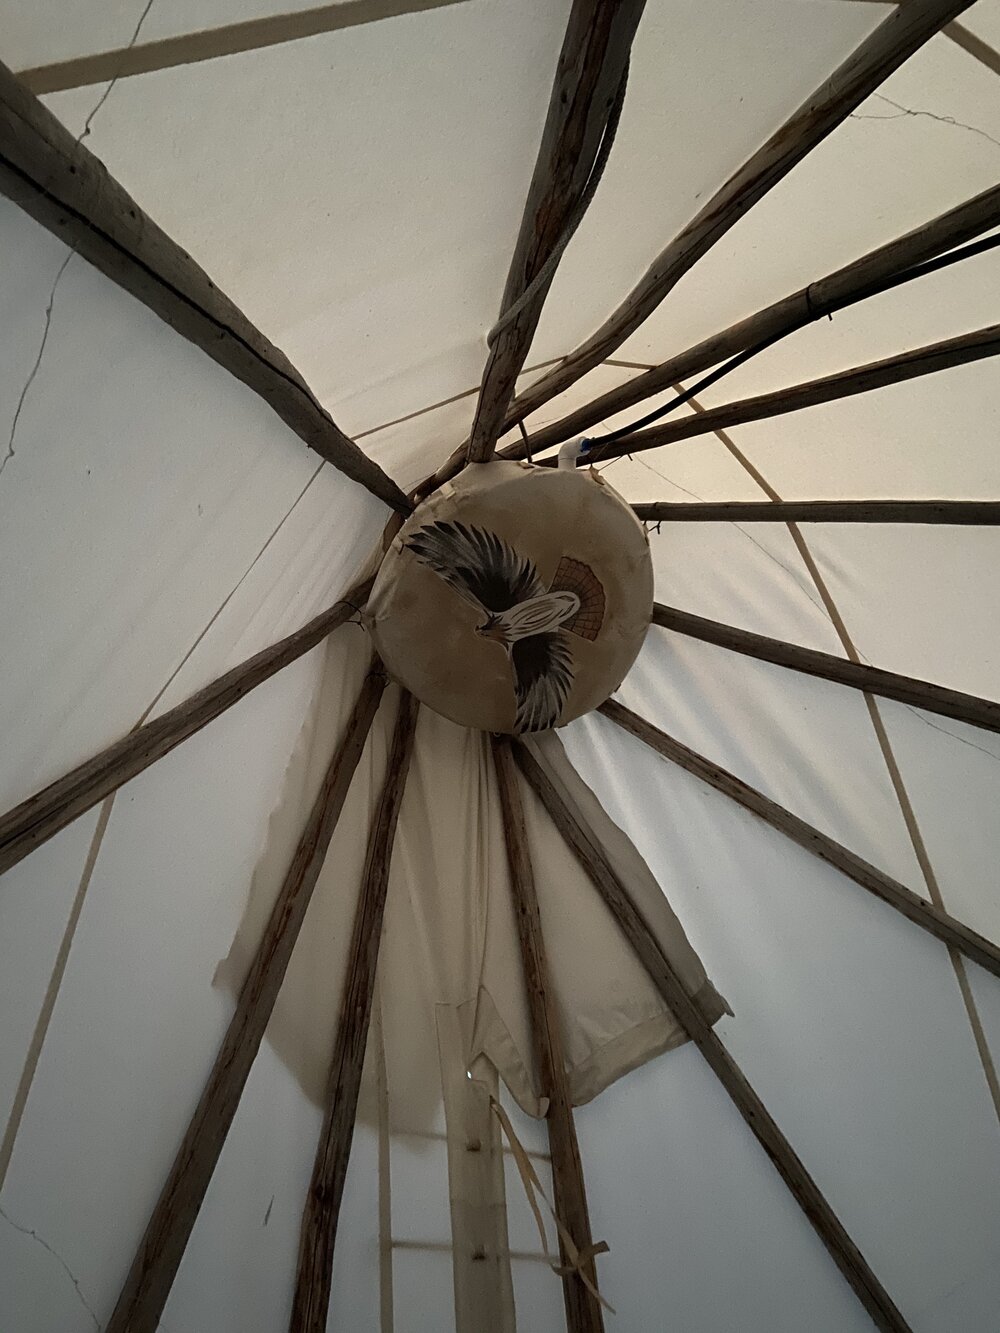  i woke up to this painted eagle drum on the ‘ceiling’ of our teepee tent. Reminded me of Isaiah 40:1 '“but those who hope in the Lord will renew their strength. They will soar on wings like eagles; they will run and not grow weary, they will walk an